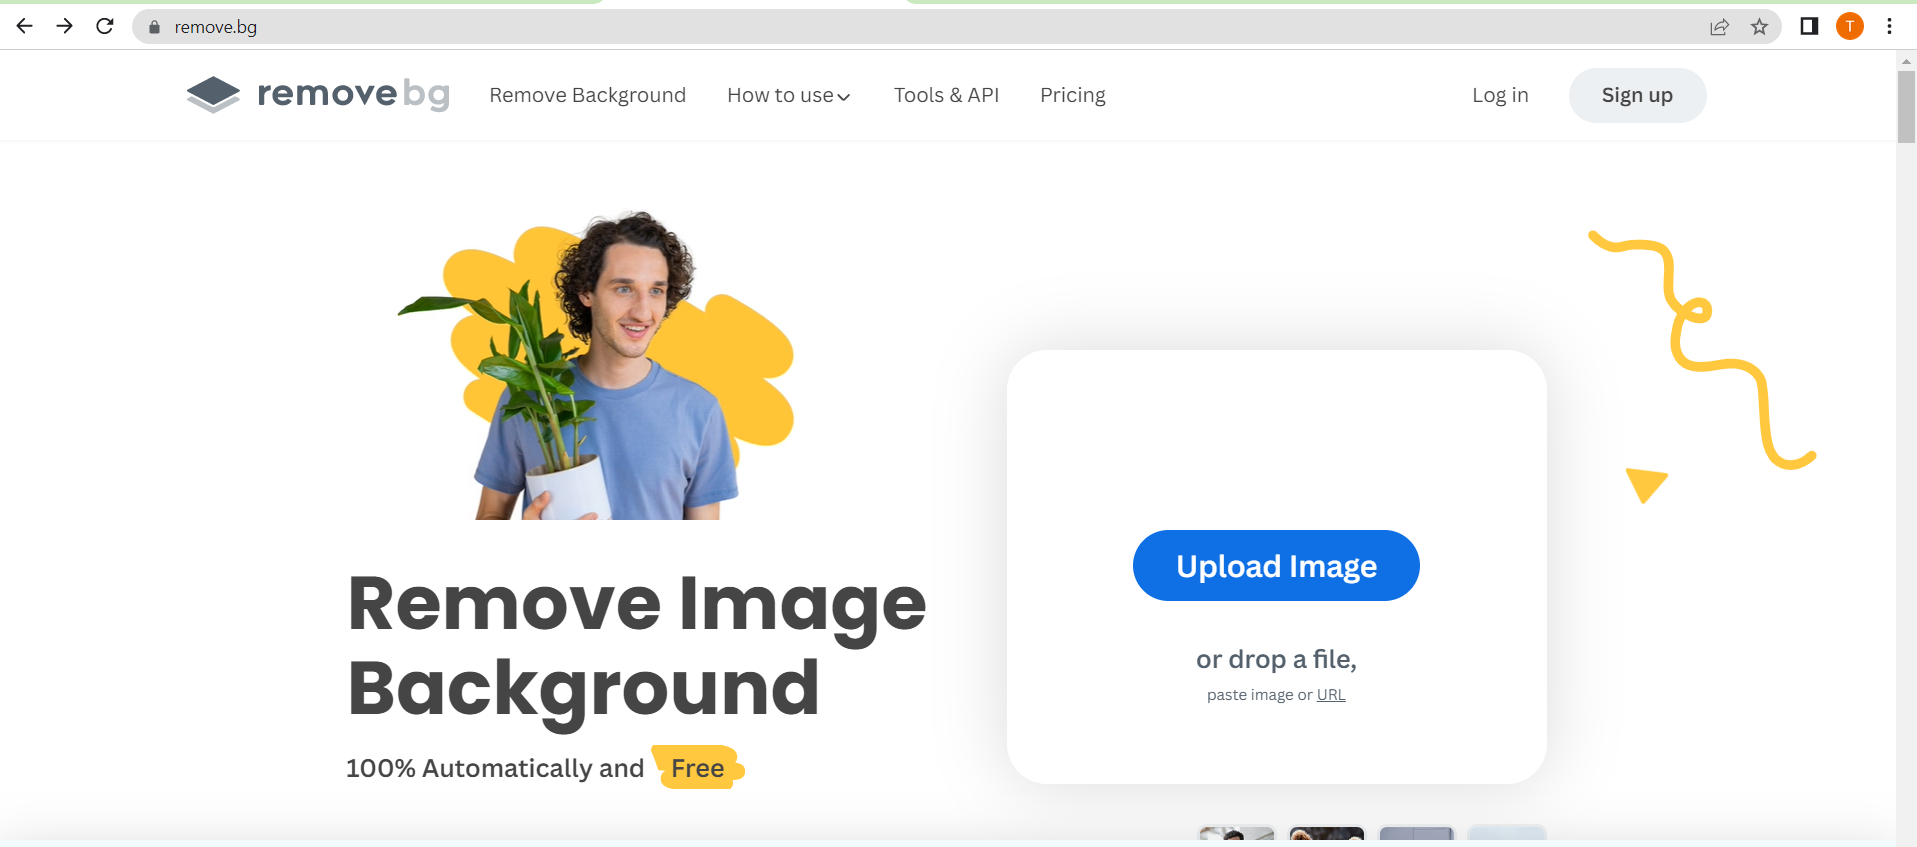 activating the web-based image editor